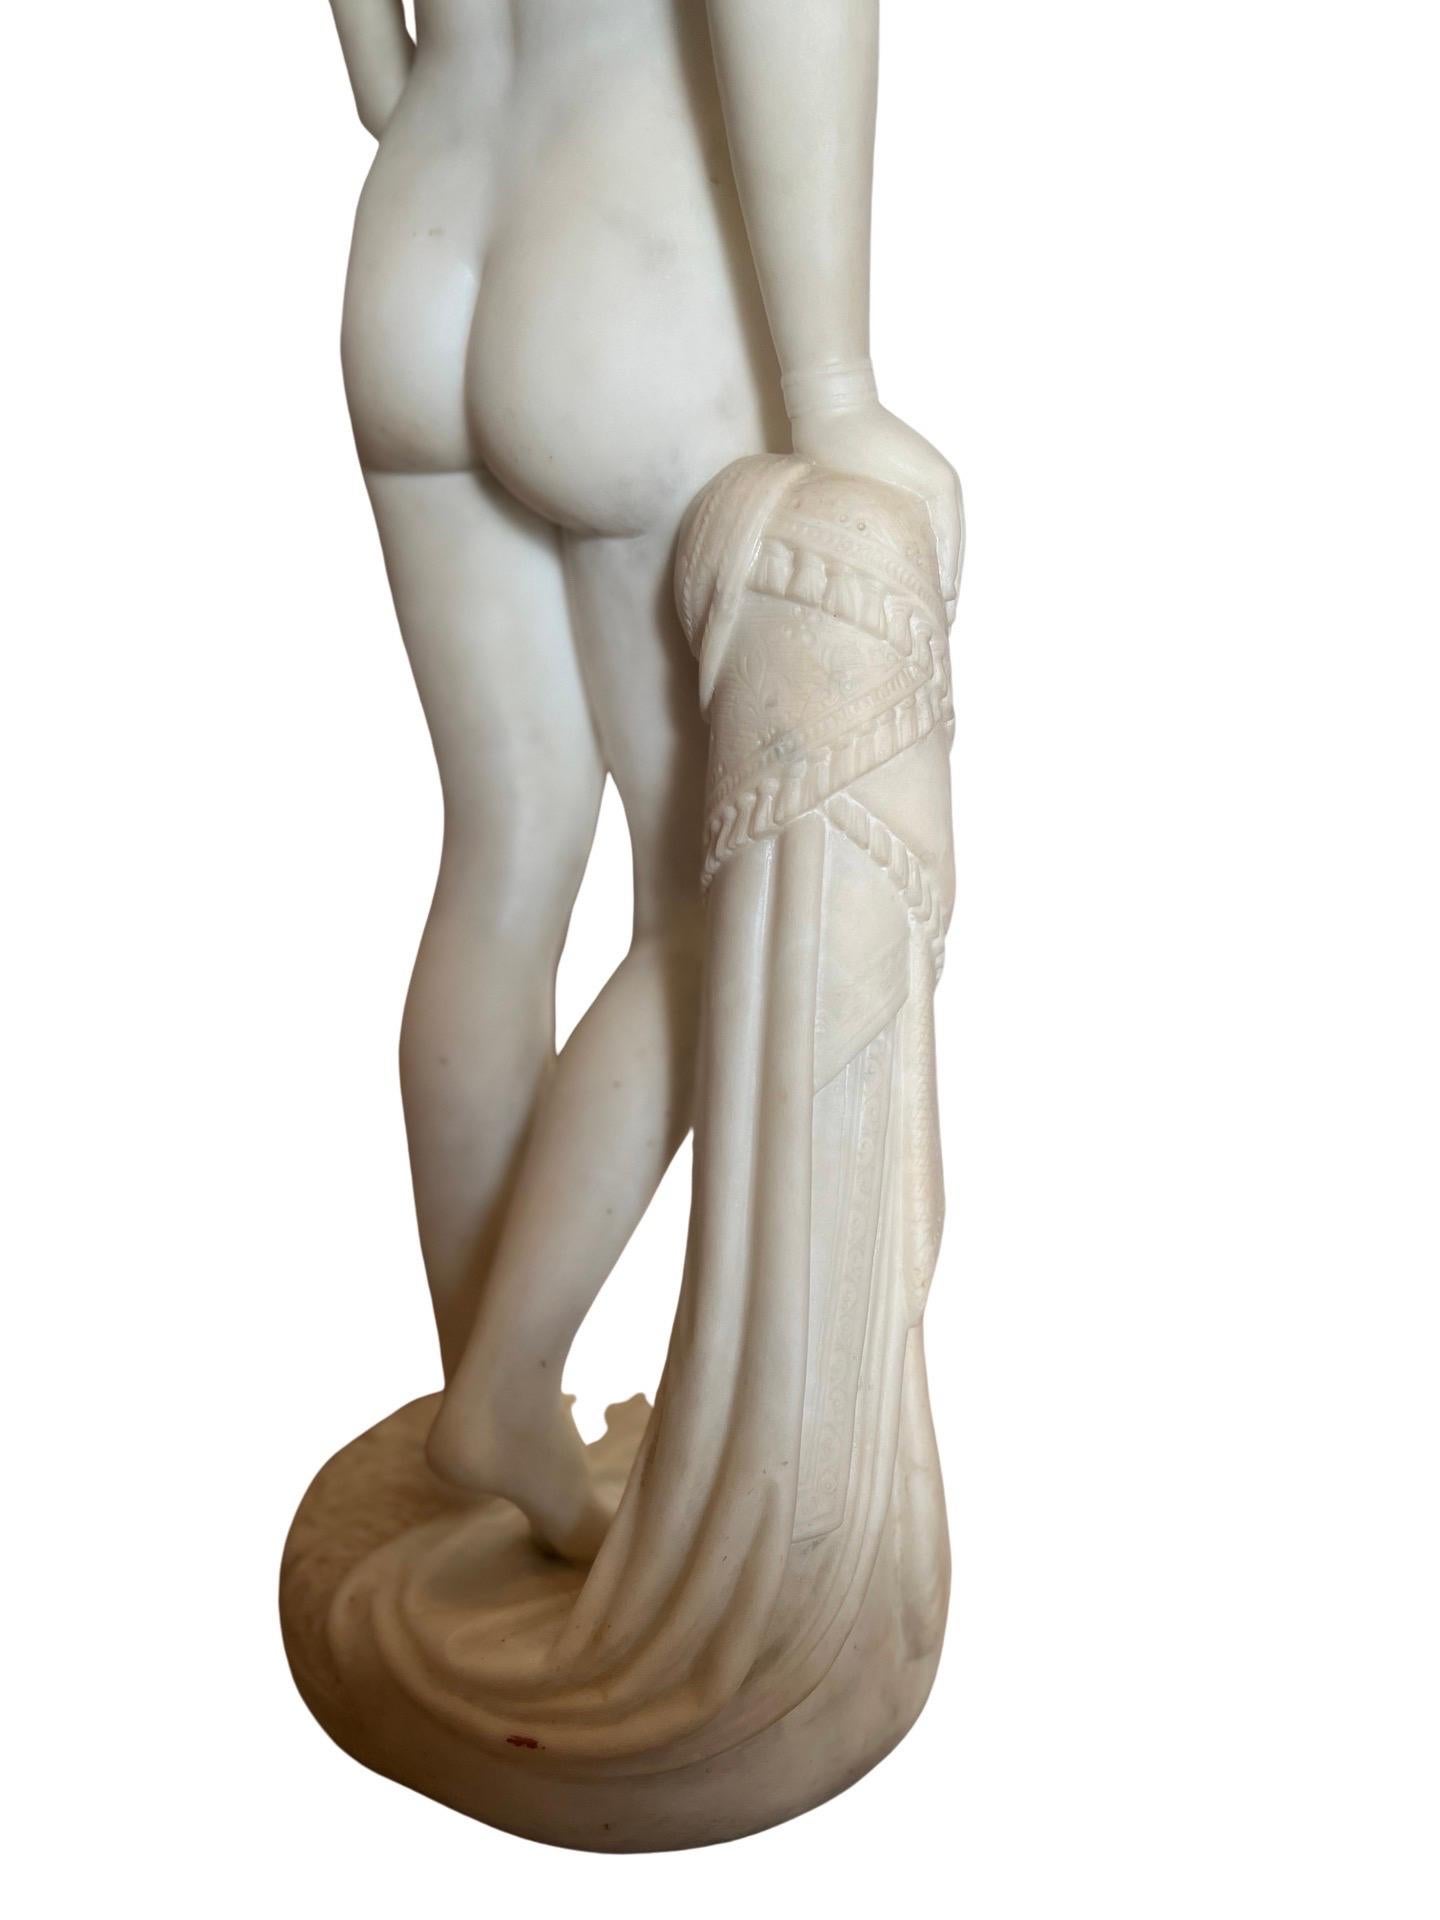 After Hiram Powers, Grand Tour Marble Sculpture of “the Greek Slave” For Sale 8